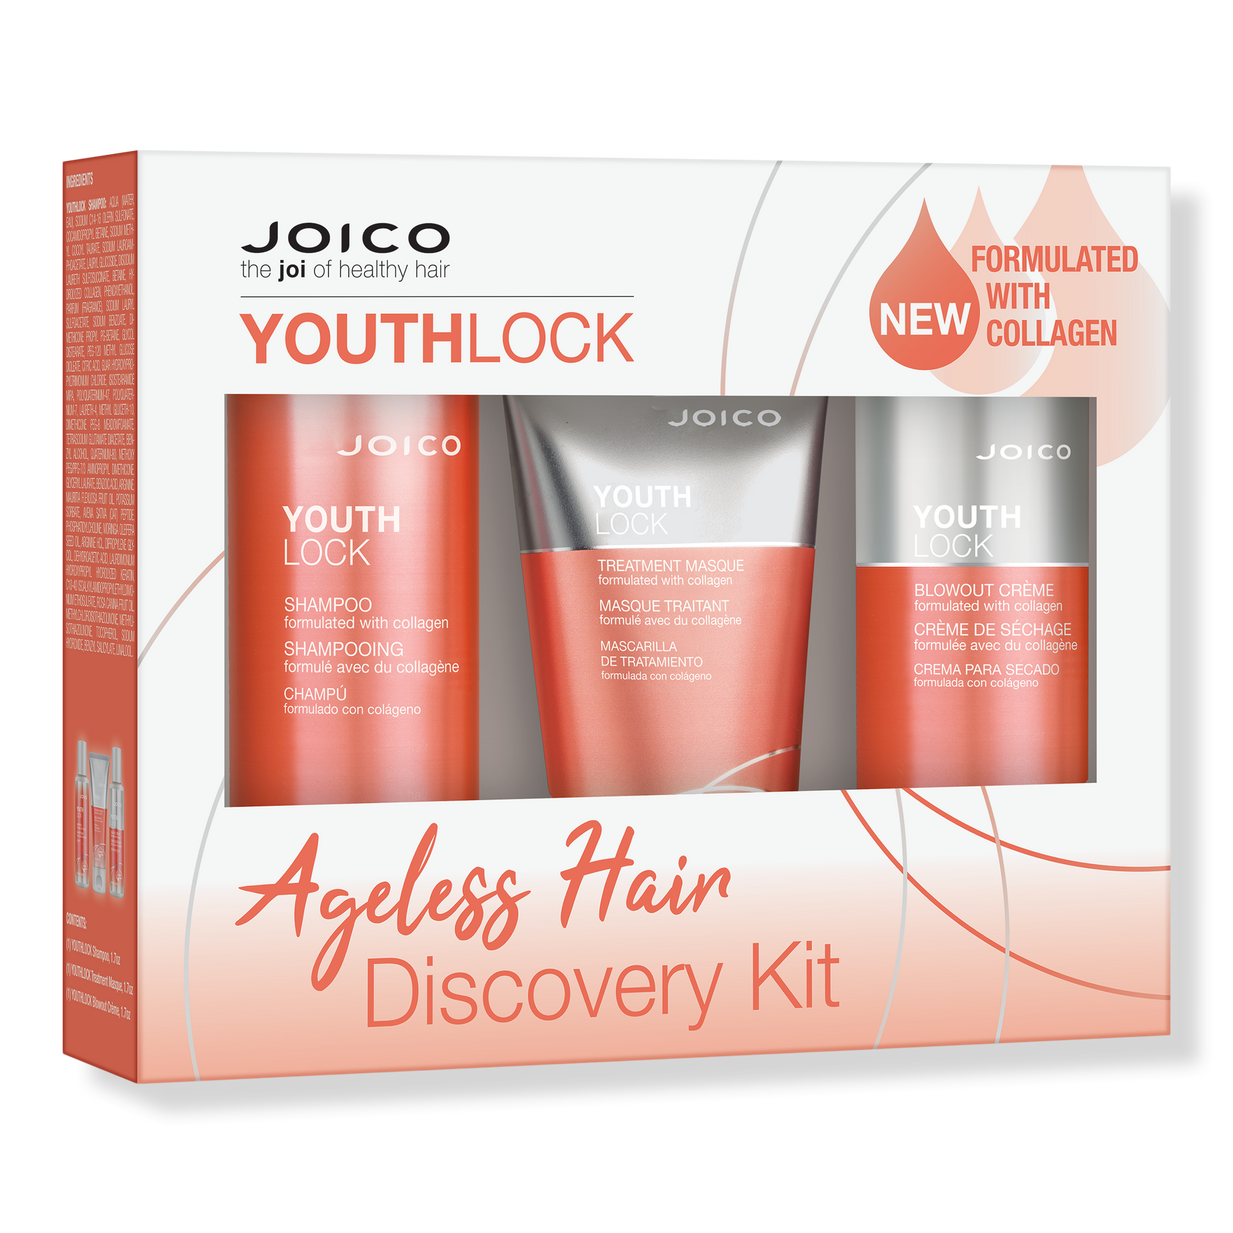 YouthLock Ageless Hair Discovery Kit